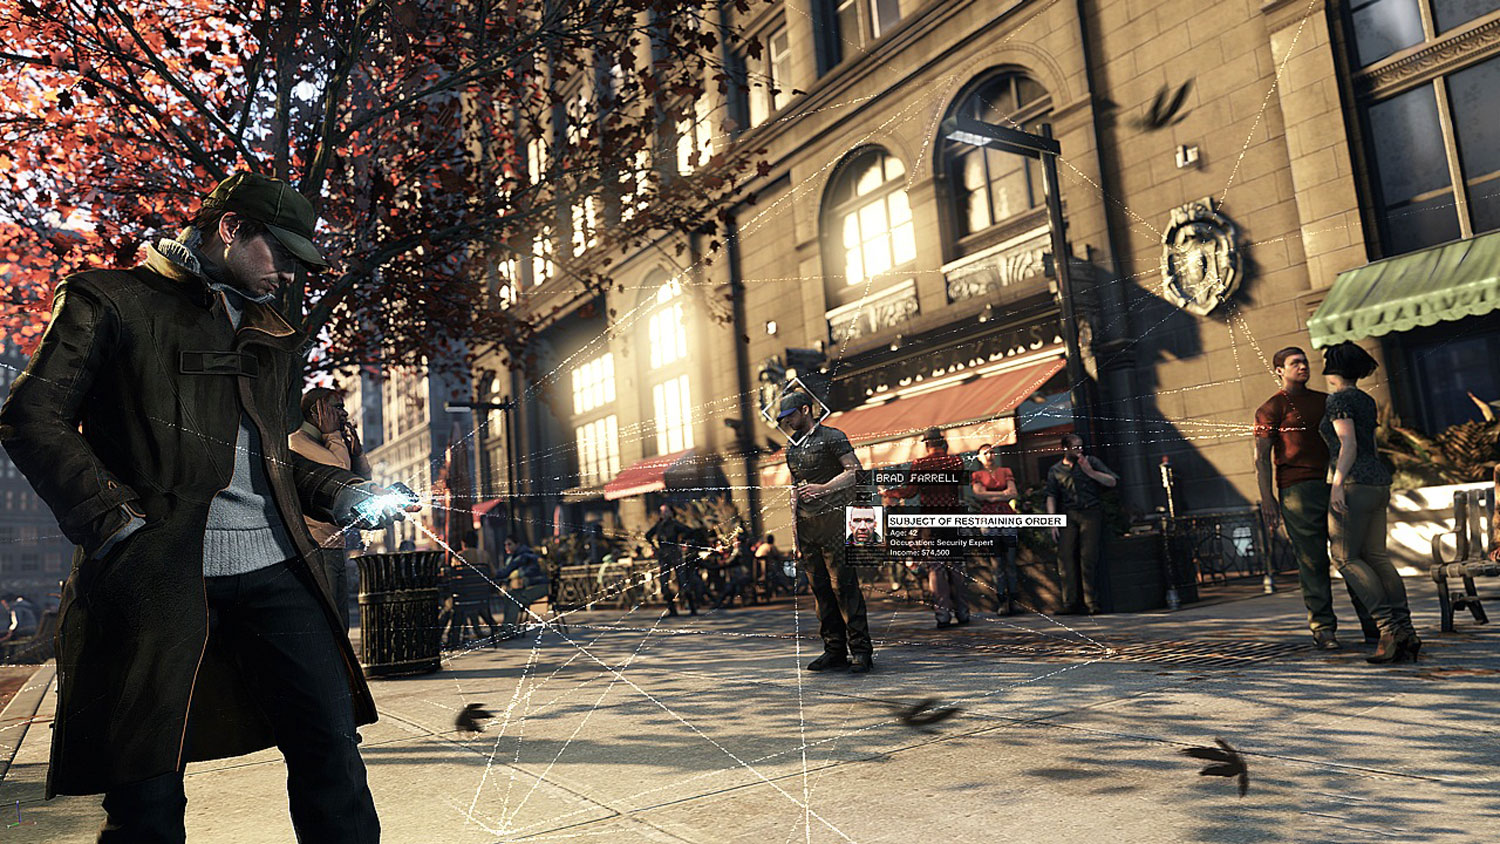 Watch Dogs Legion gameplay demoed at Ubisoft E3 2019 conference